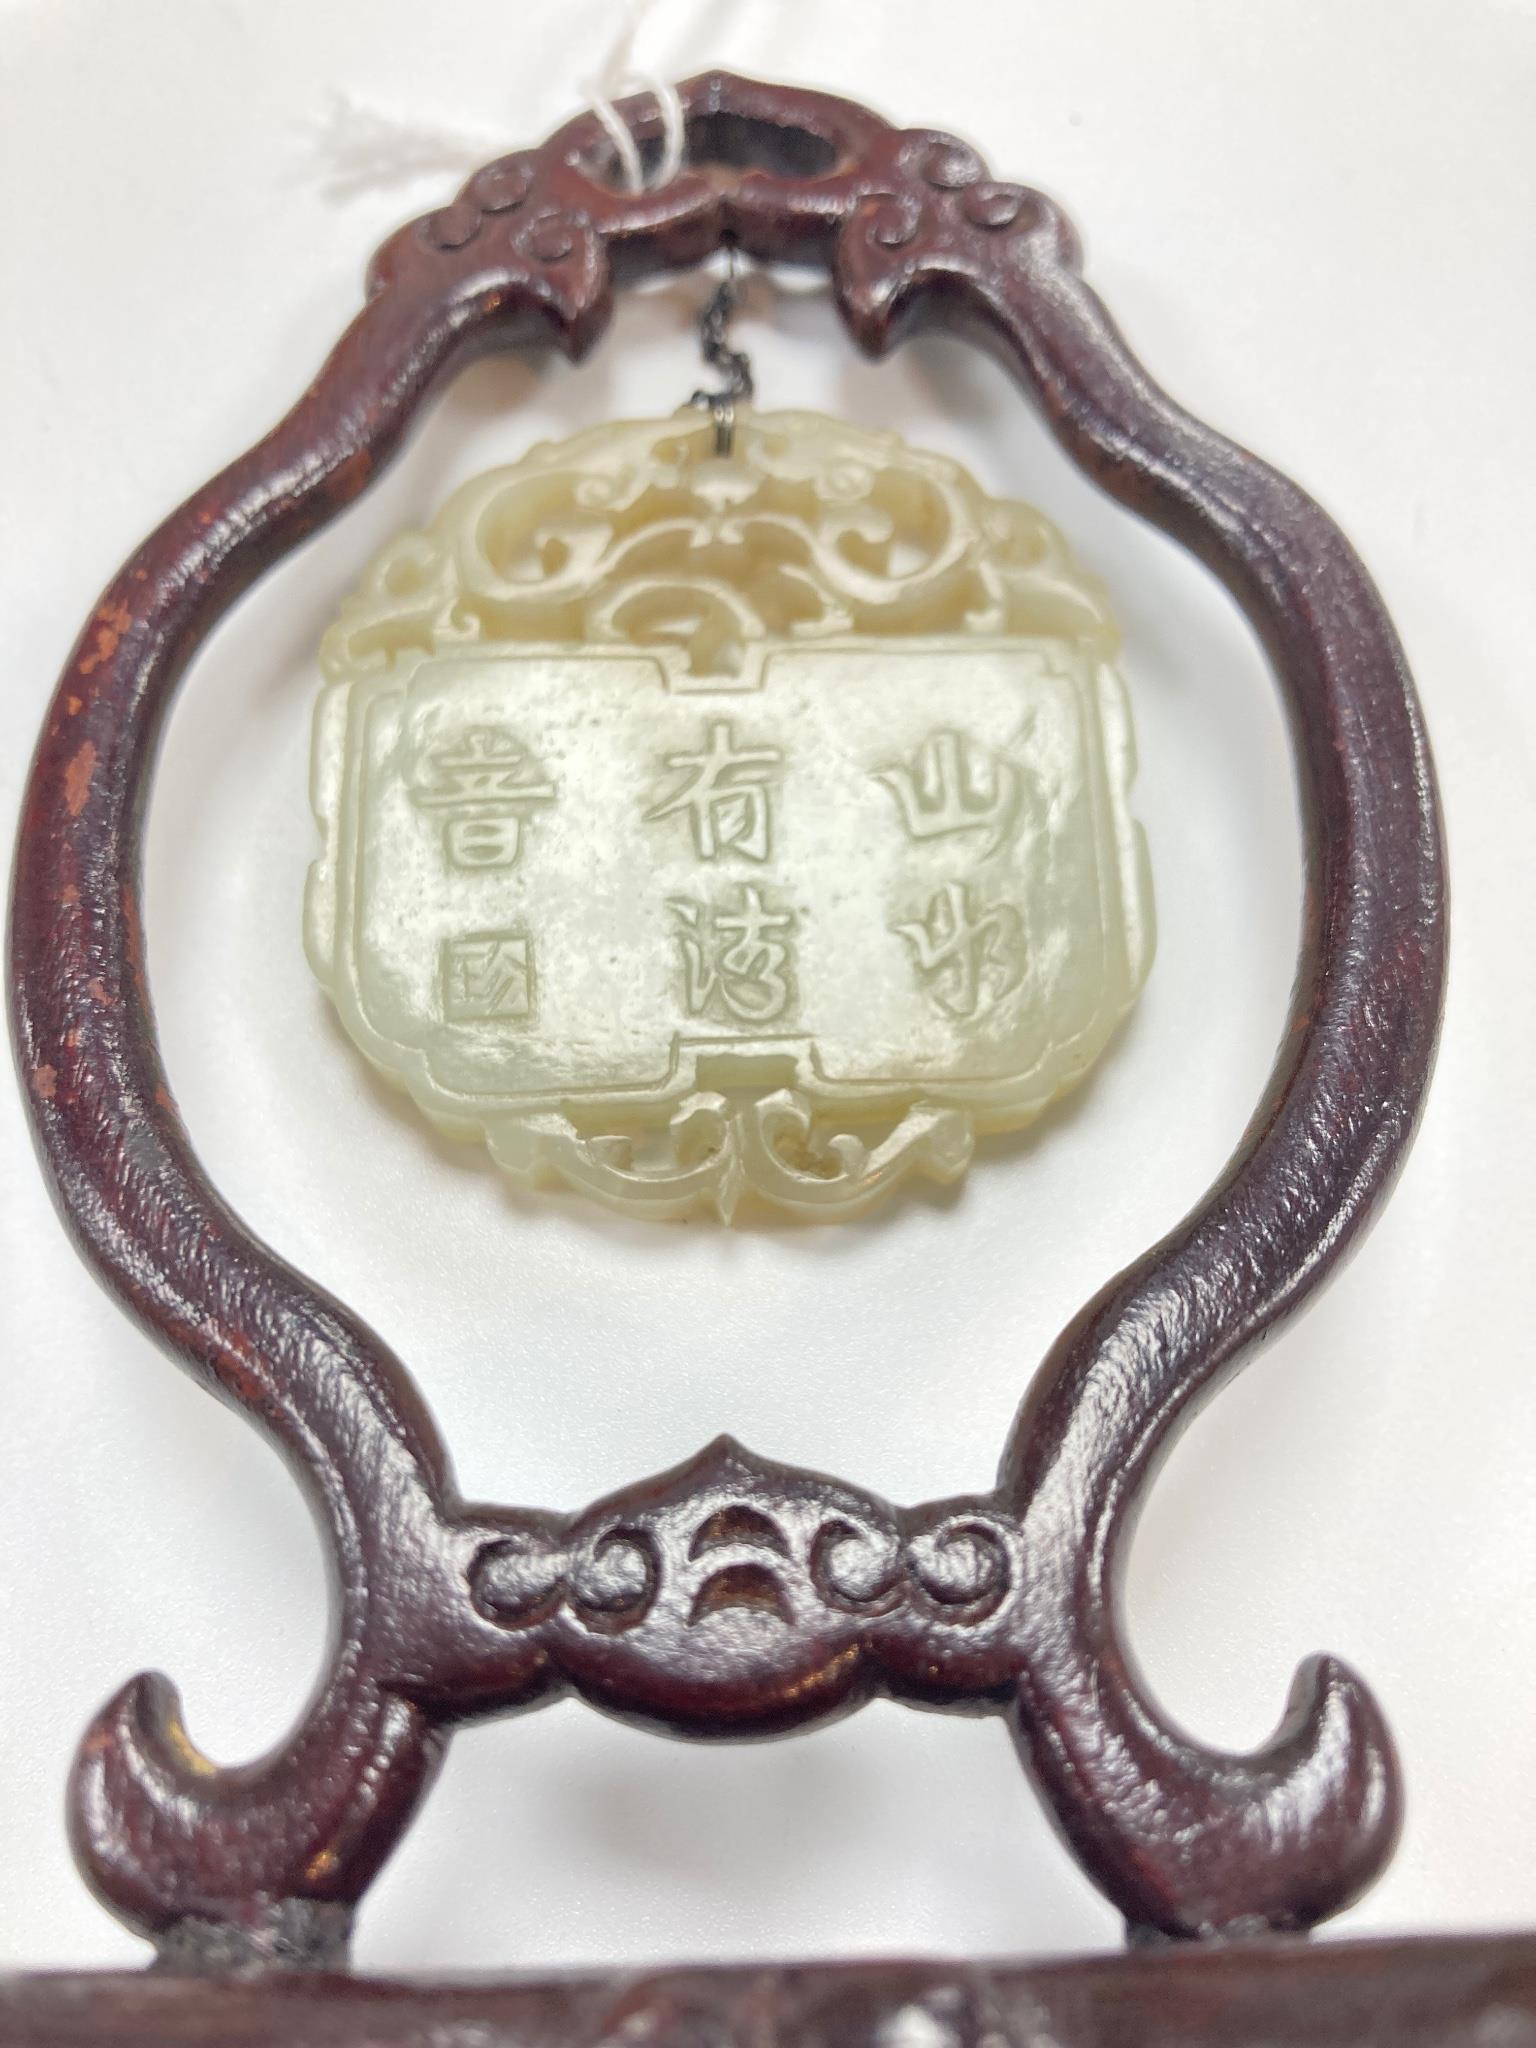 A Chinese pale celadon jade inscribed plaque, 19th/20th century, 5.1cm, suspended from a wood stand